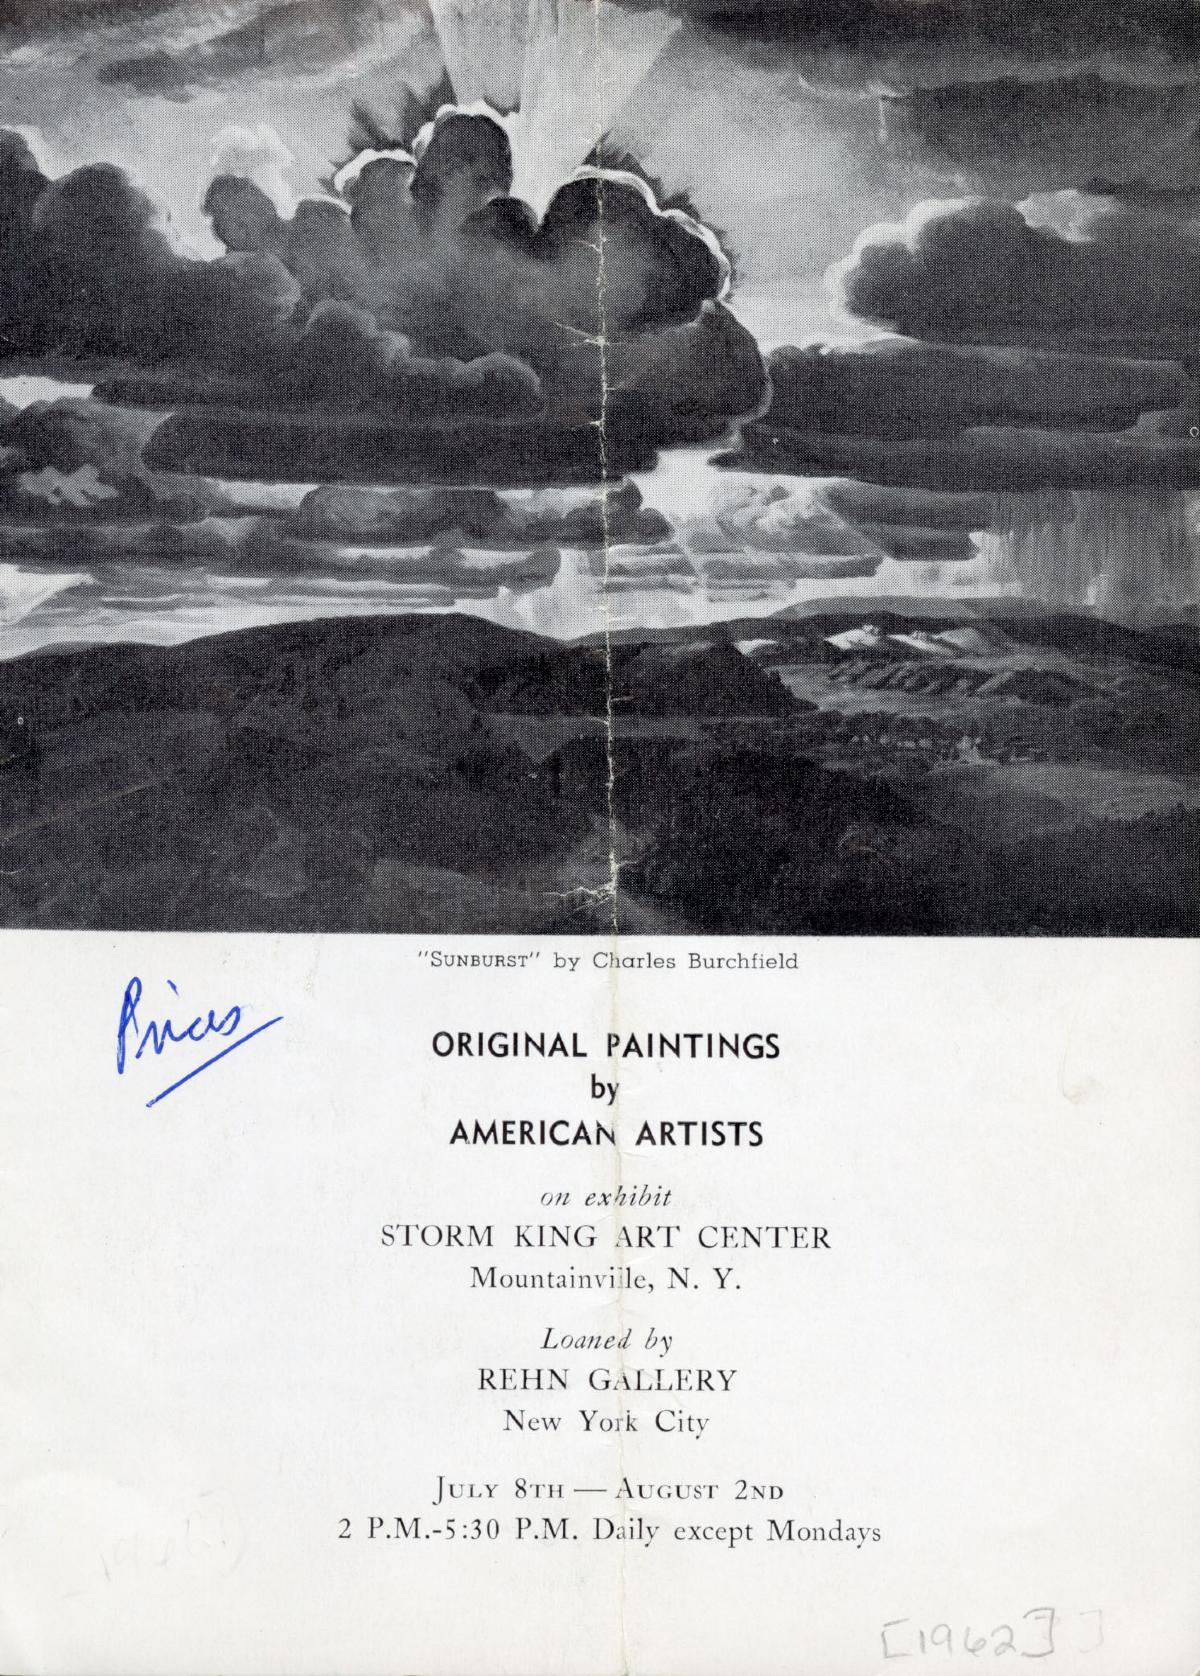 Original Paintings by American Artists, July 8-August 2, 1962, catalogue cover